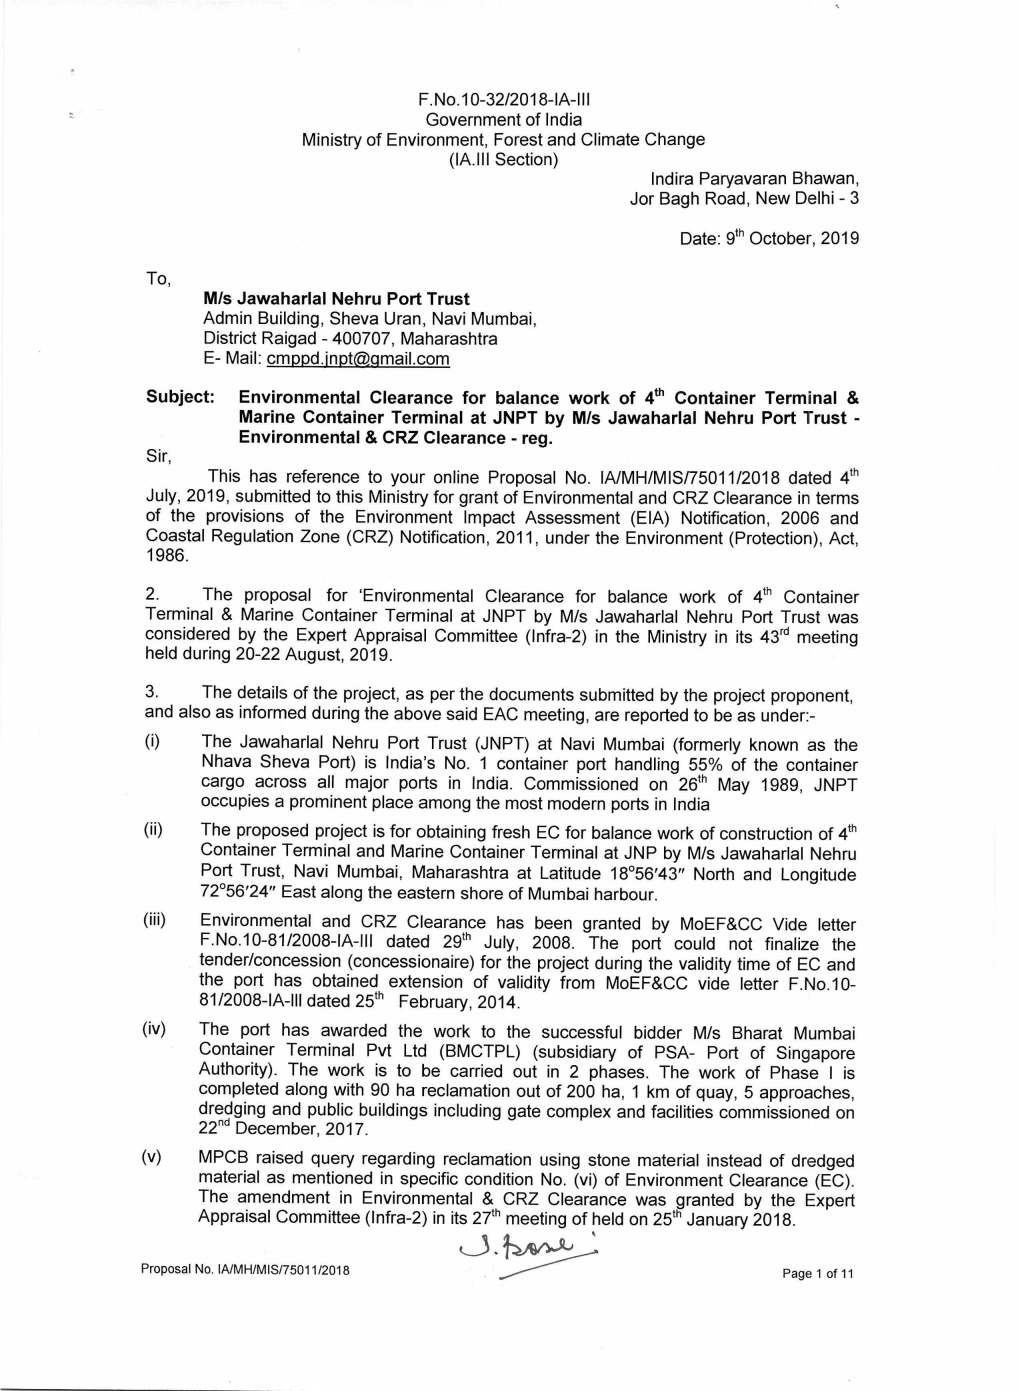 F.No.10-32/2018-IA-Ill Government of India Ministry of Environment, Forest and Climate Change (IA.III Section) Indira Paryavaran Bhawan, Jor Bagh Road, New Delhi - 3